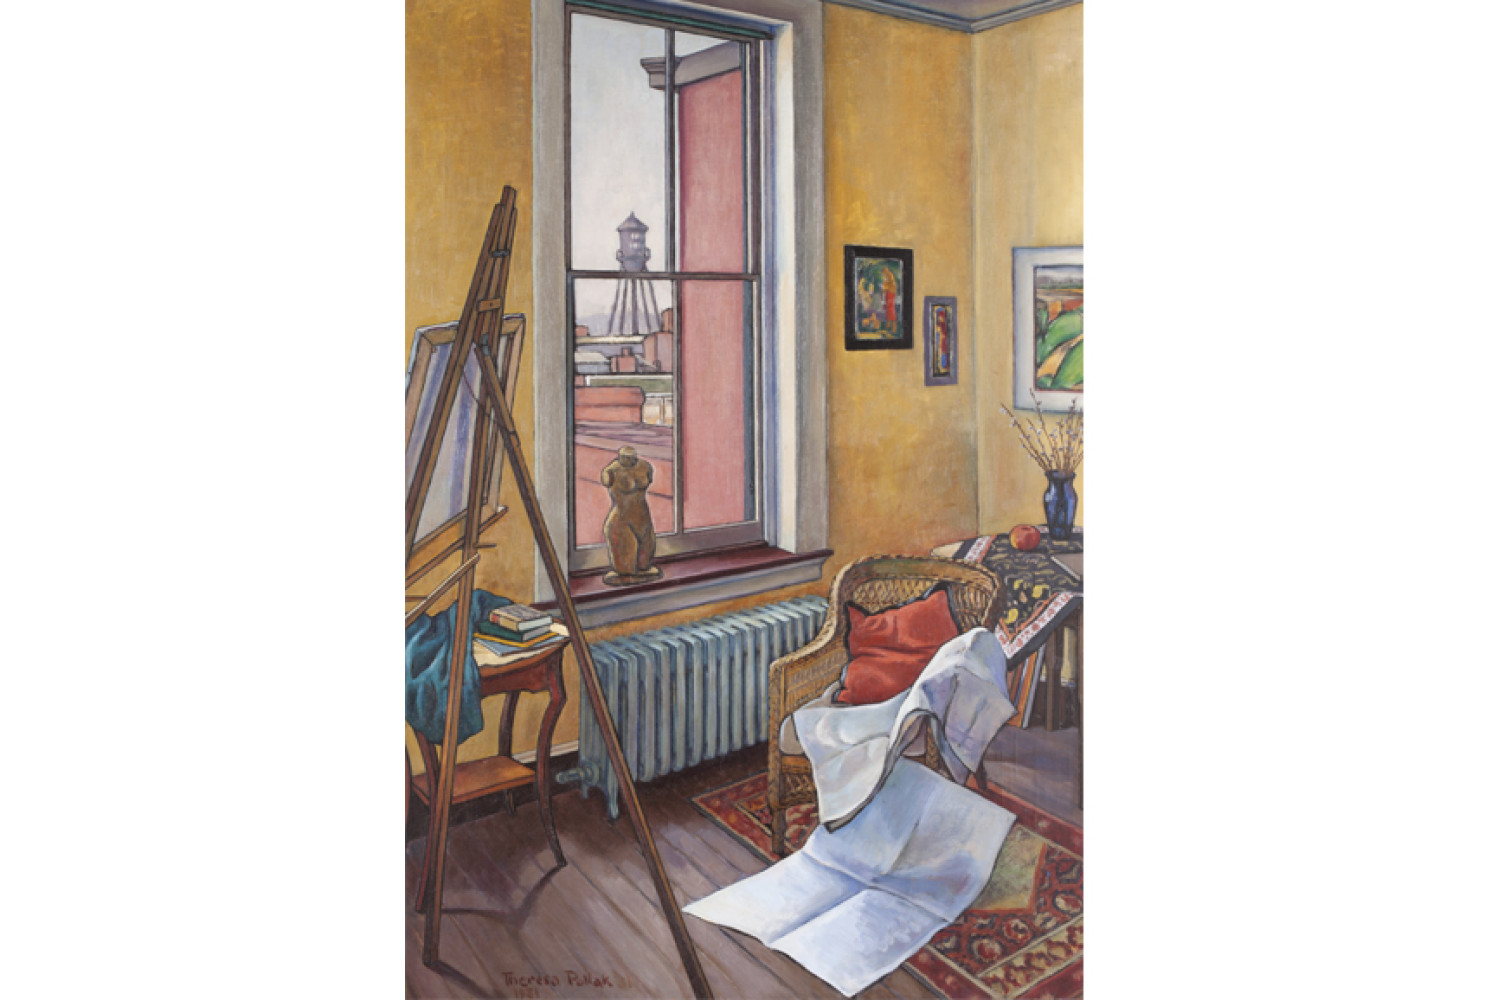 Art Studio, 1931, By Theresa Pollak (American, 1899—2002); Oil on canvas; 40 1/4 x 27 inches; 2013.10.09; The Johnson Collection, Spartanburg, SC
